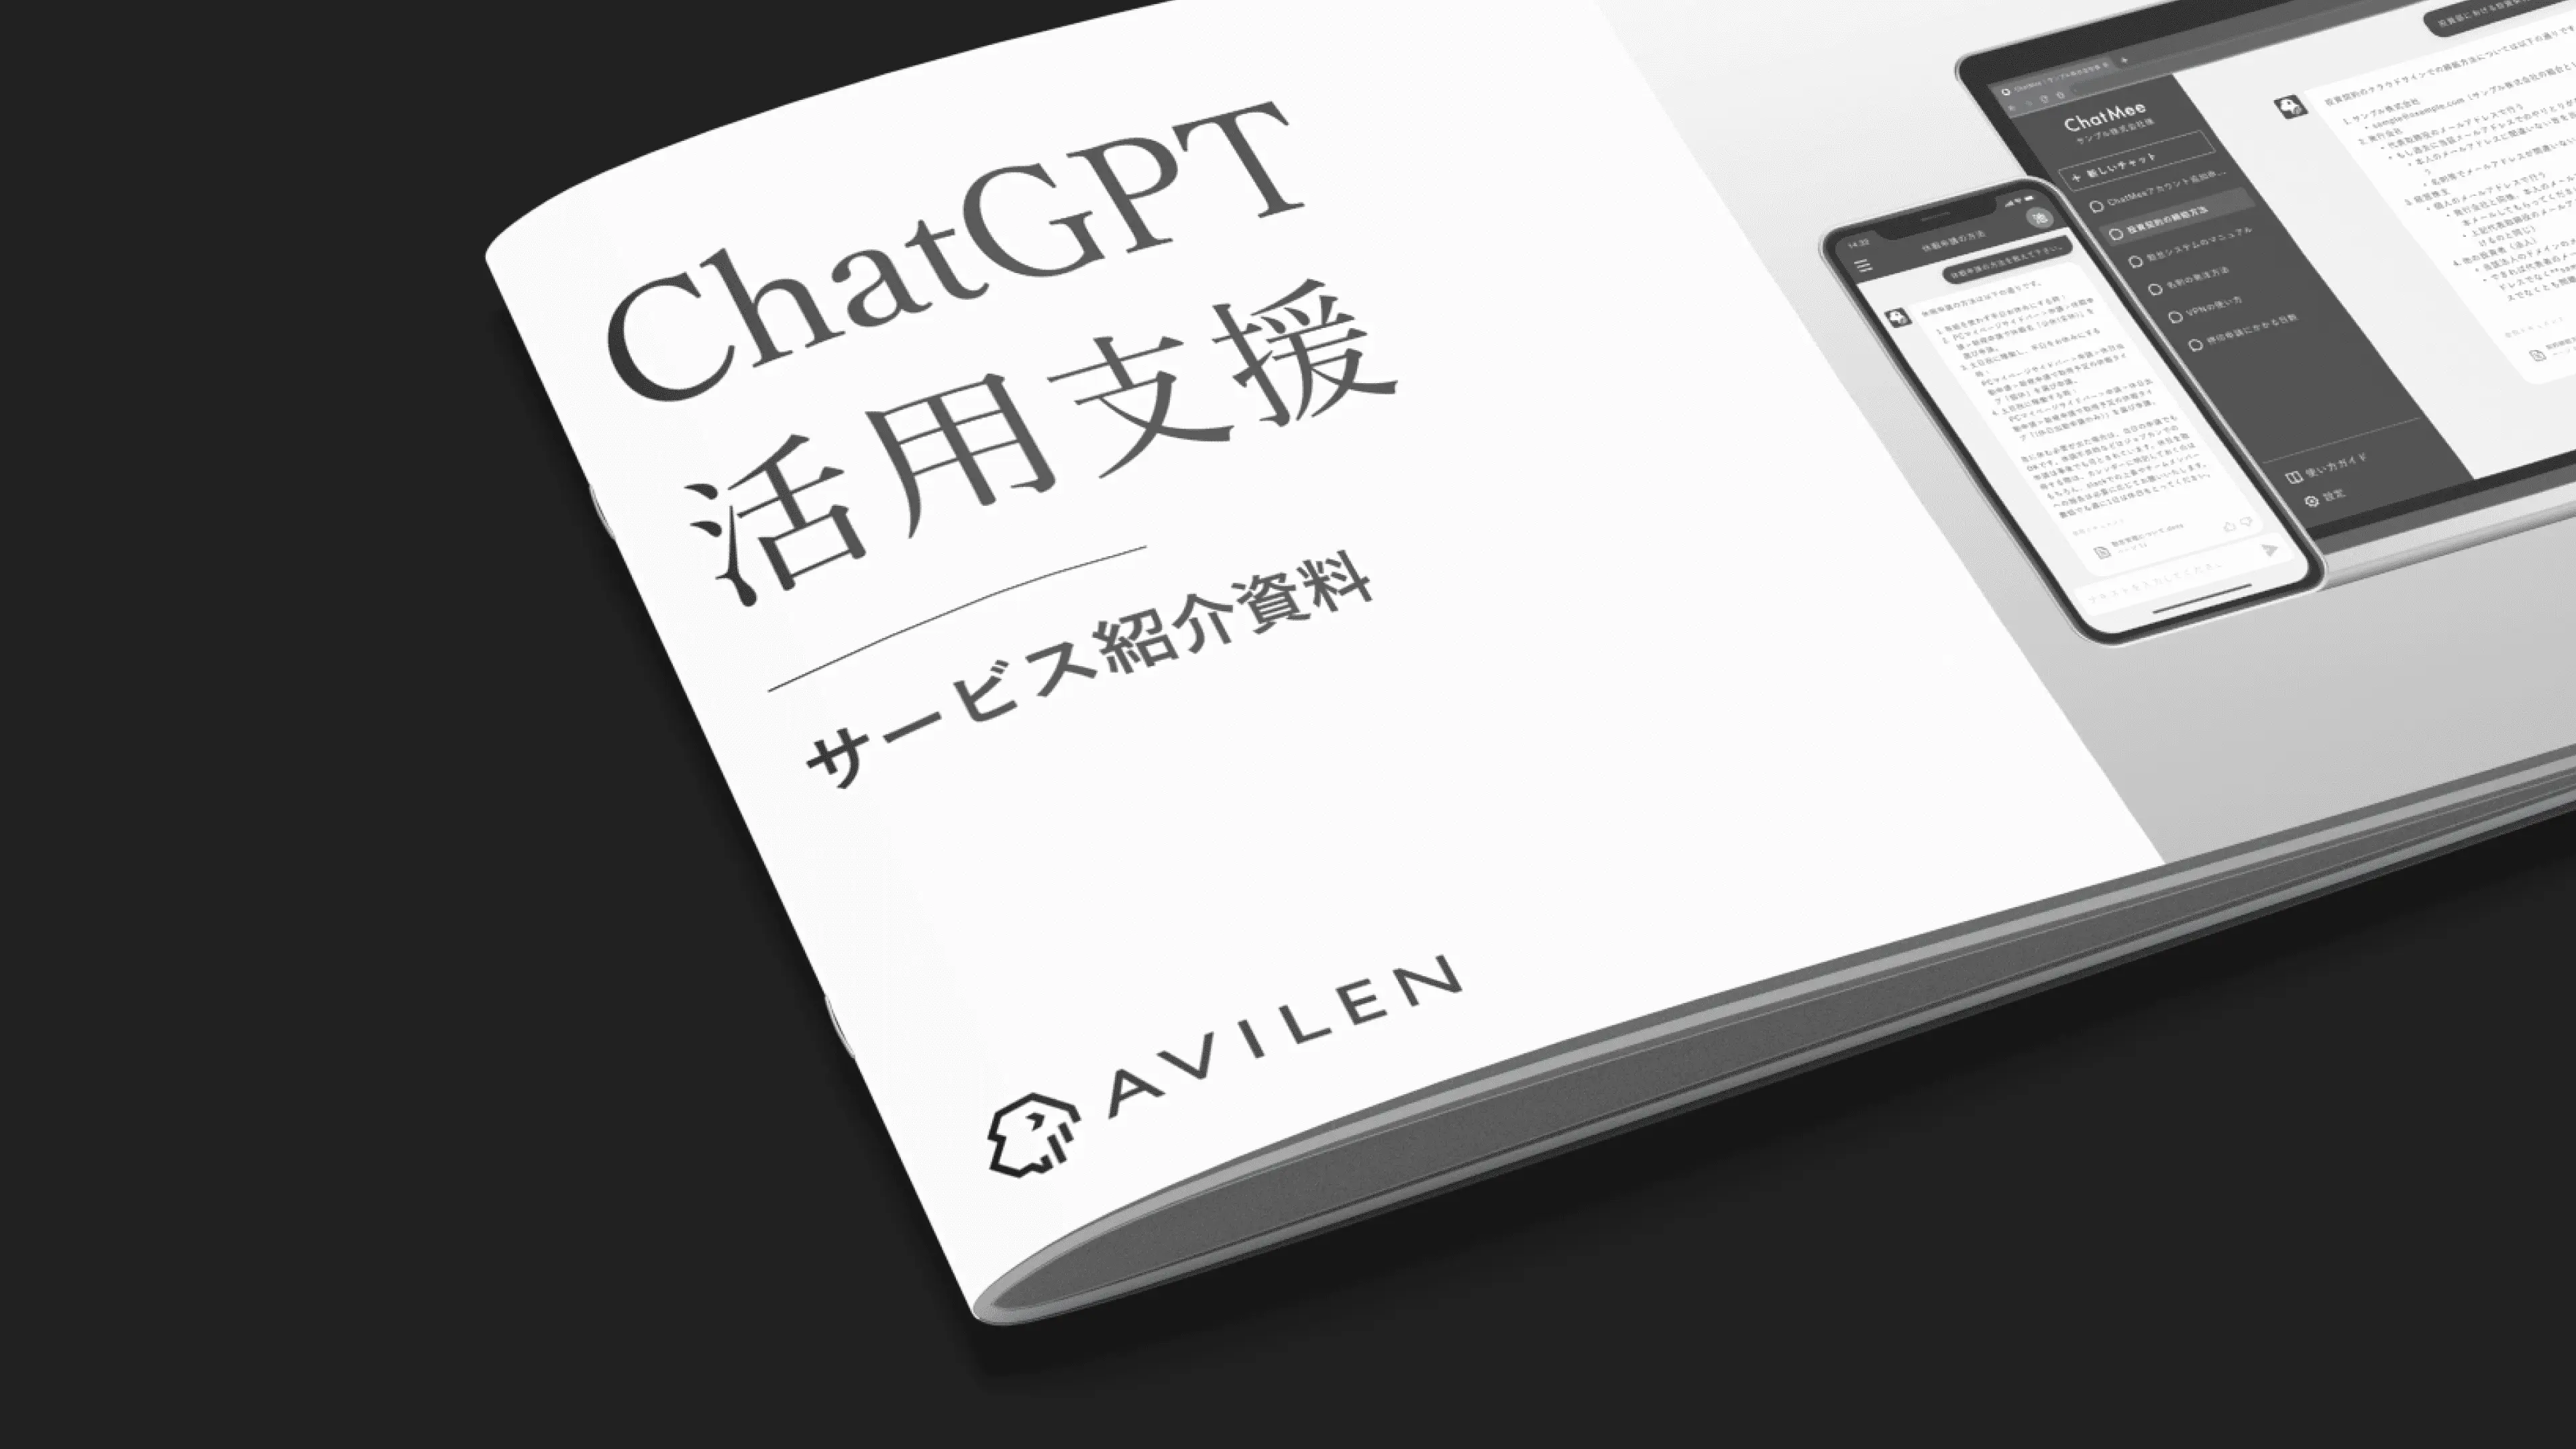 chatgpt_consulting_download